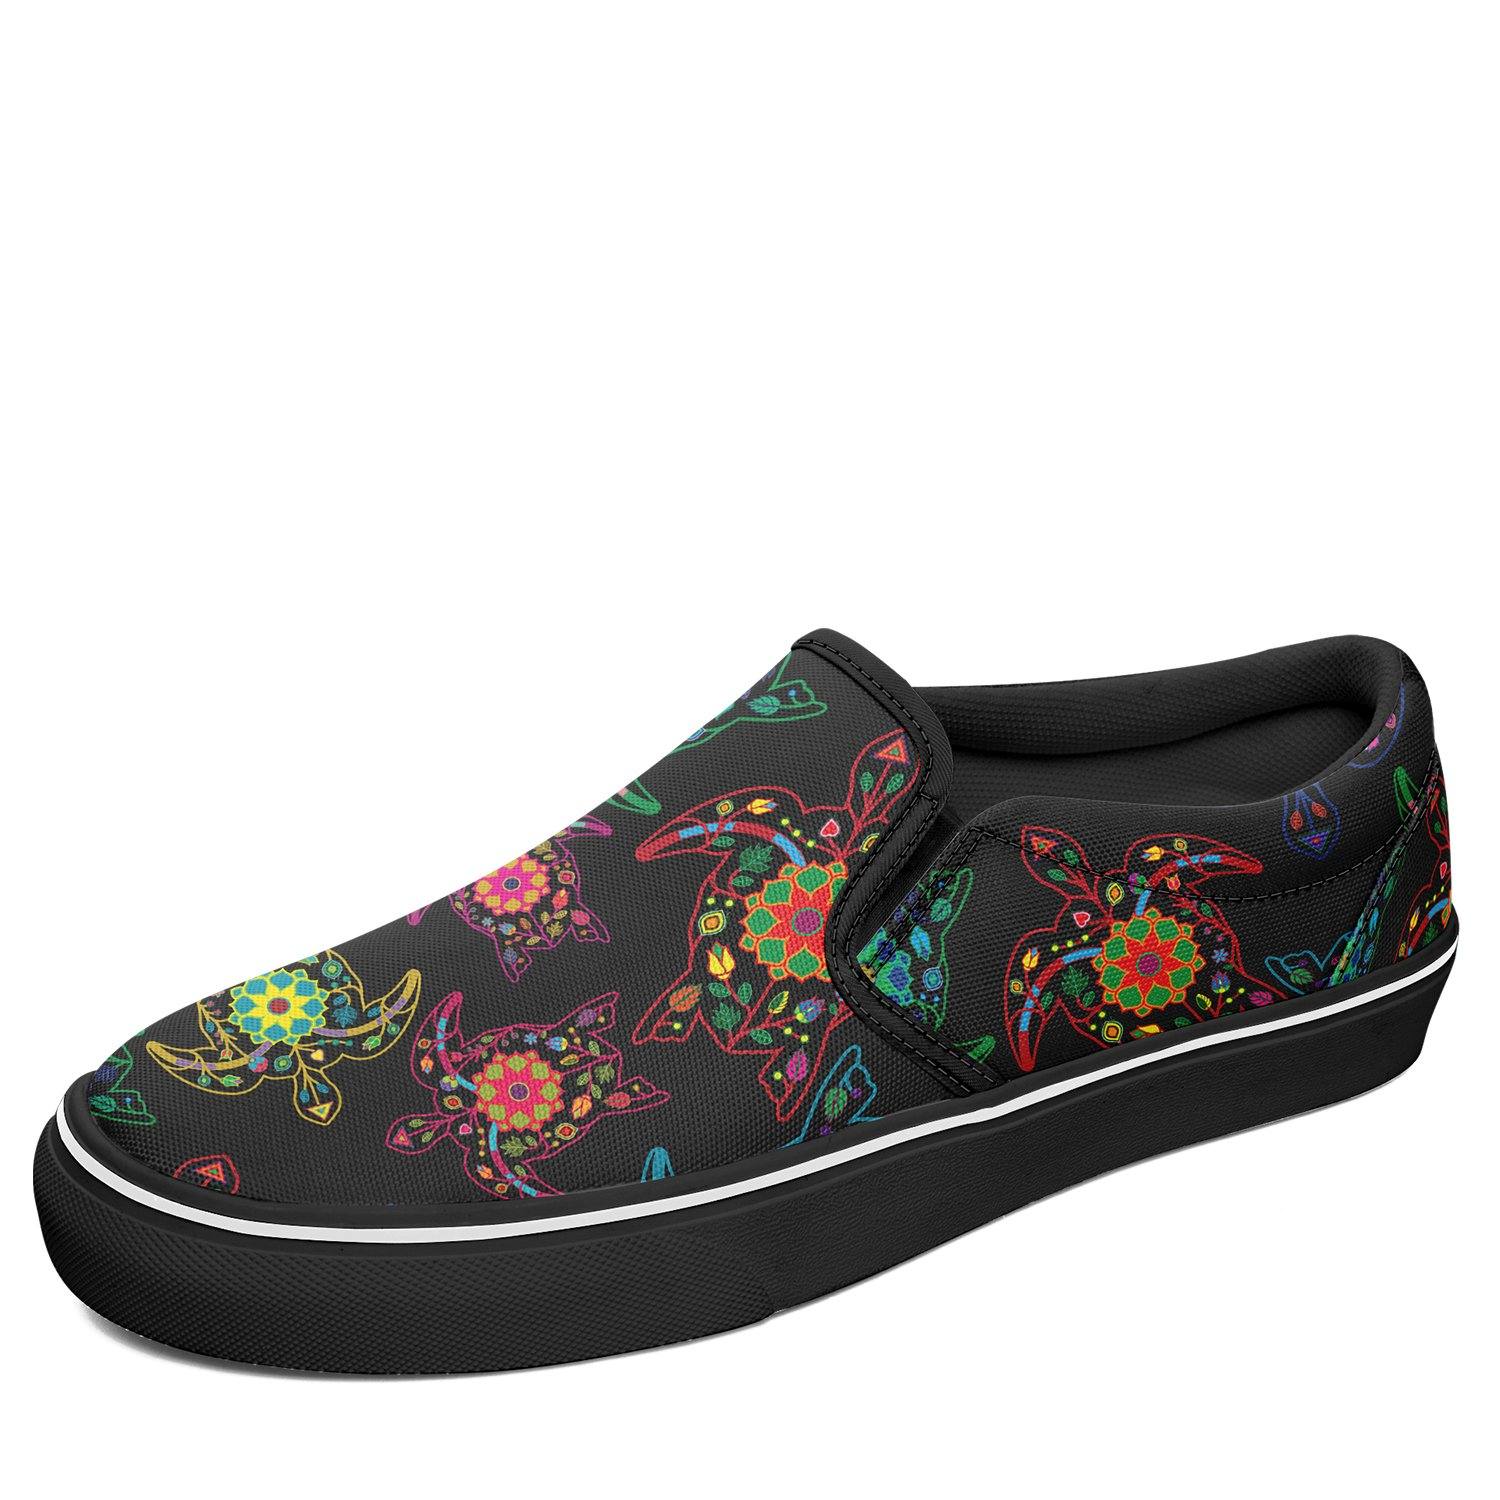 Floral Turtle Otoyimm Canvas Slip On Shoes otoyimm Herman US Youth 1 / EUR 32 Black Sole 